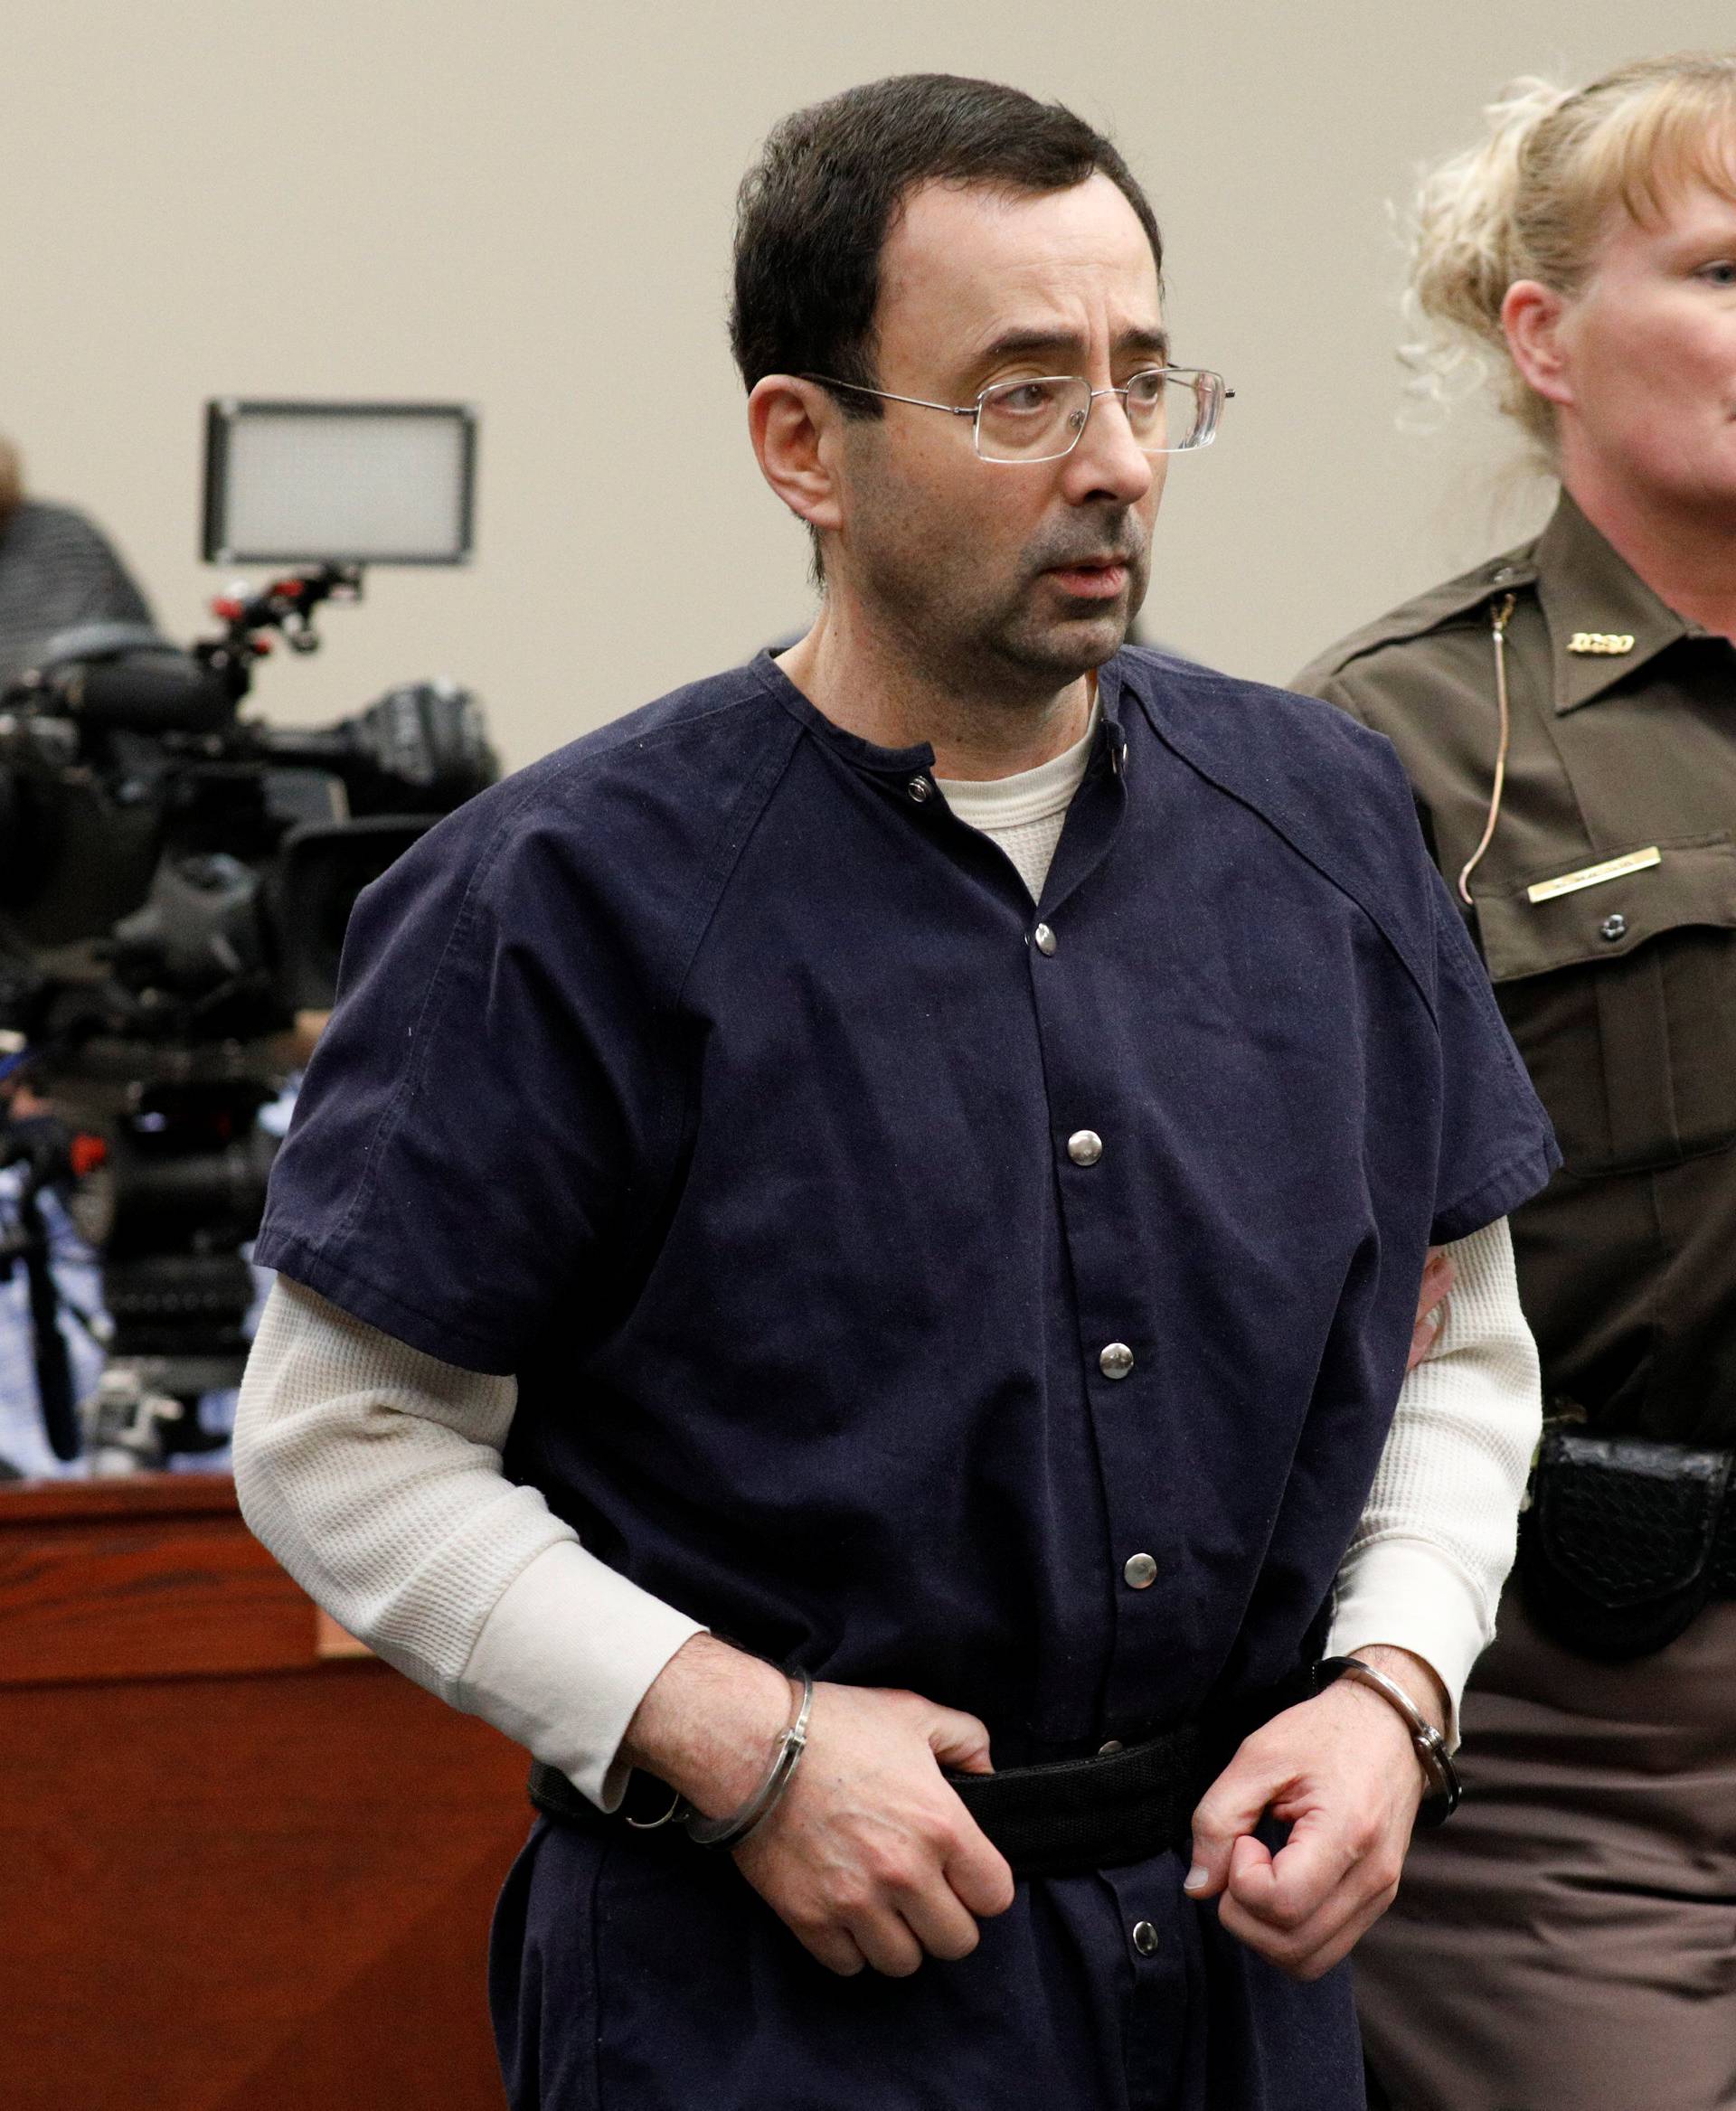 Larry Nassar, a former team USA Gymnastics doctor, who pleaded guilty in November 2017 to sexual assault charges, is led from the courtroom after listening to victim testimony during his sentencing hearing in Lansing, Michigan